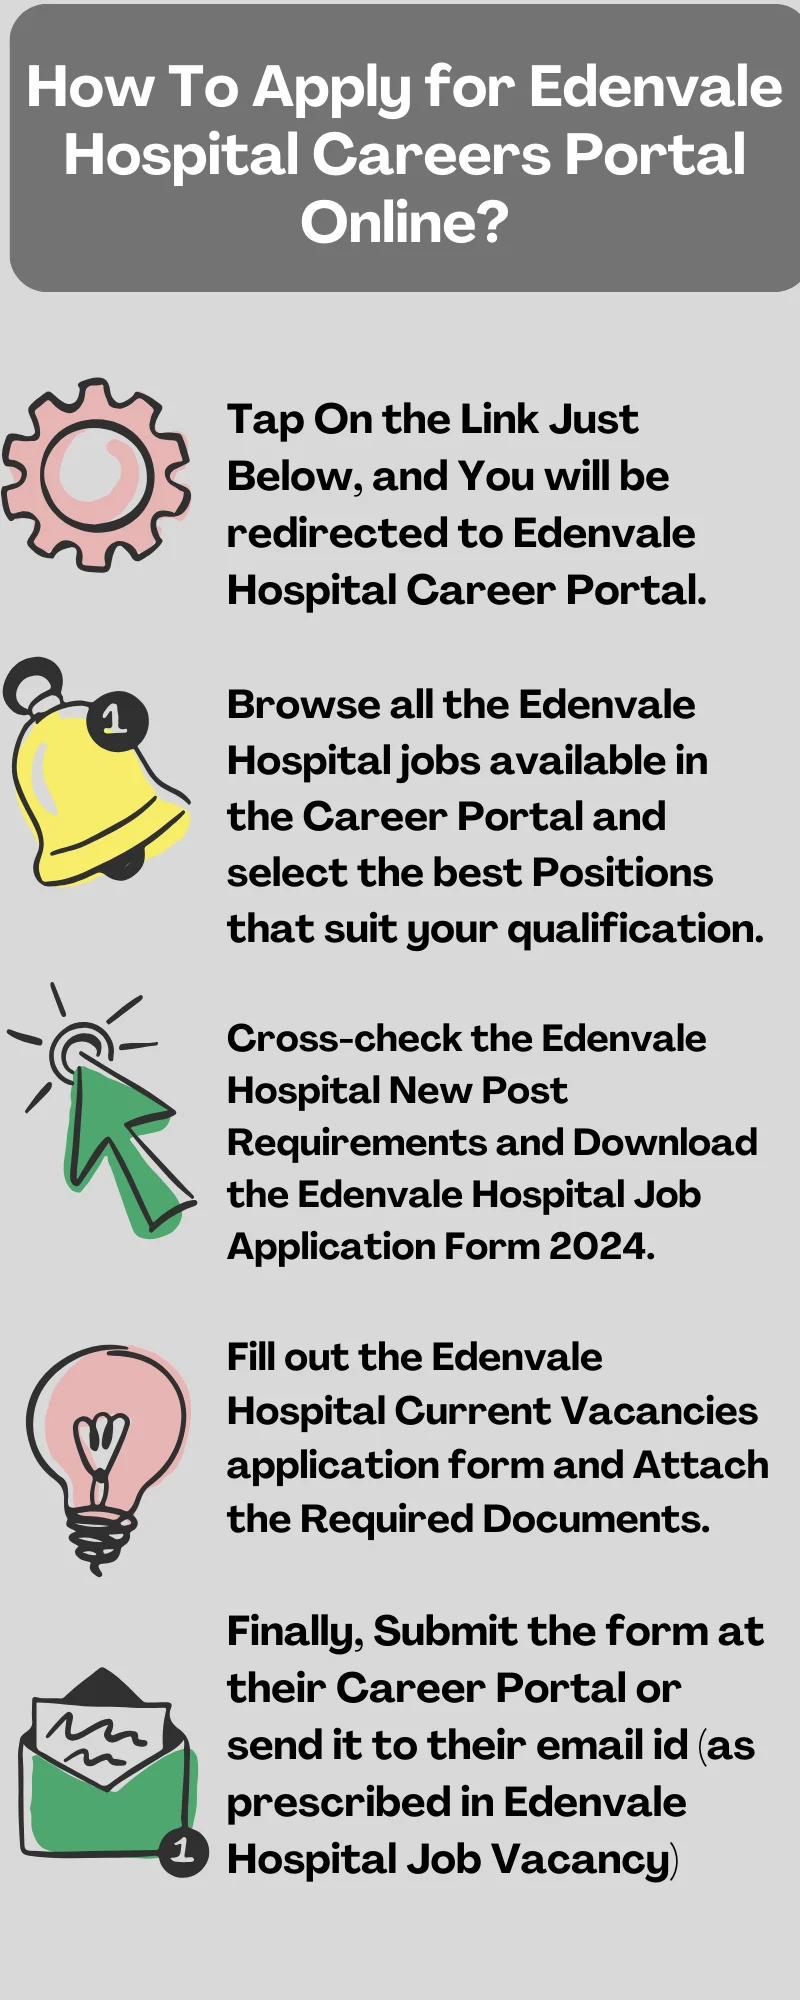 How To Apply for Edenvale Hospital Careers Portal Online?